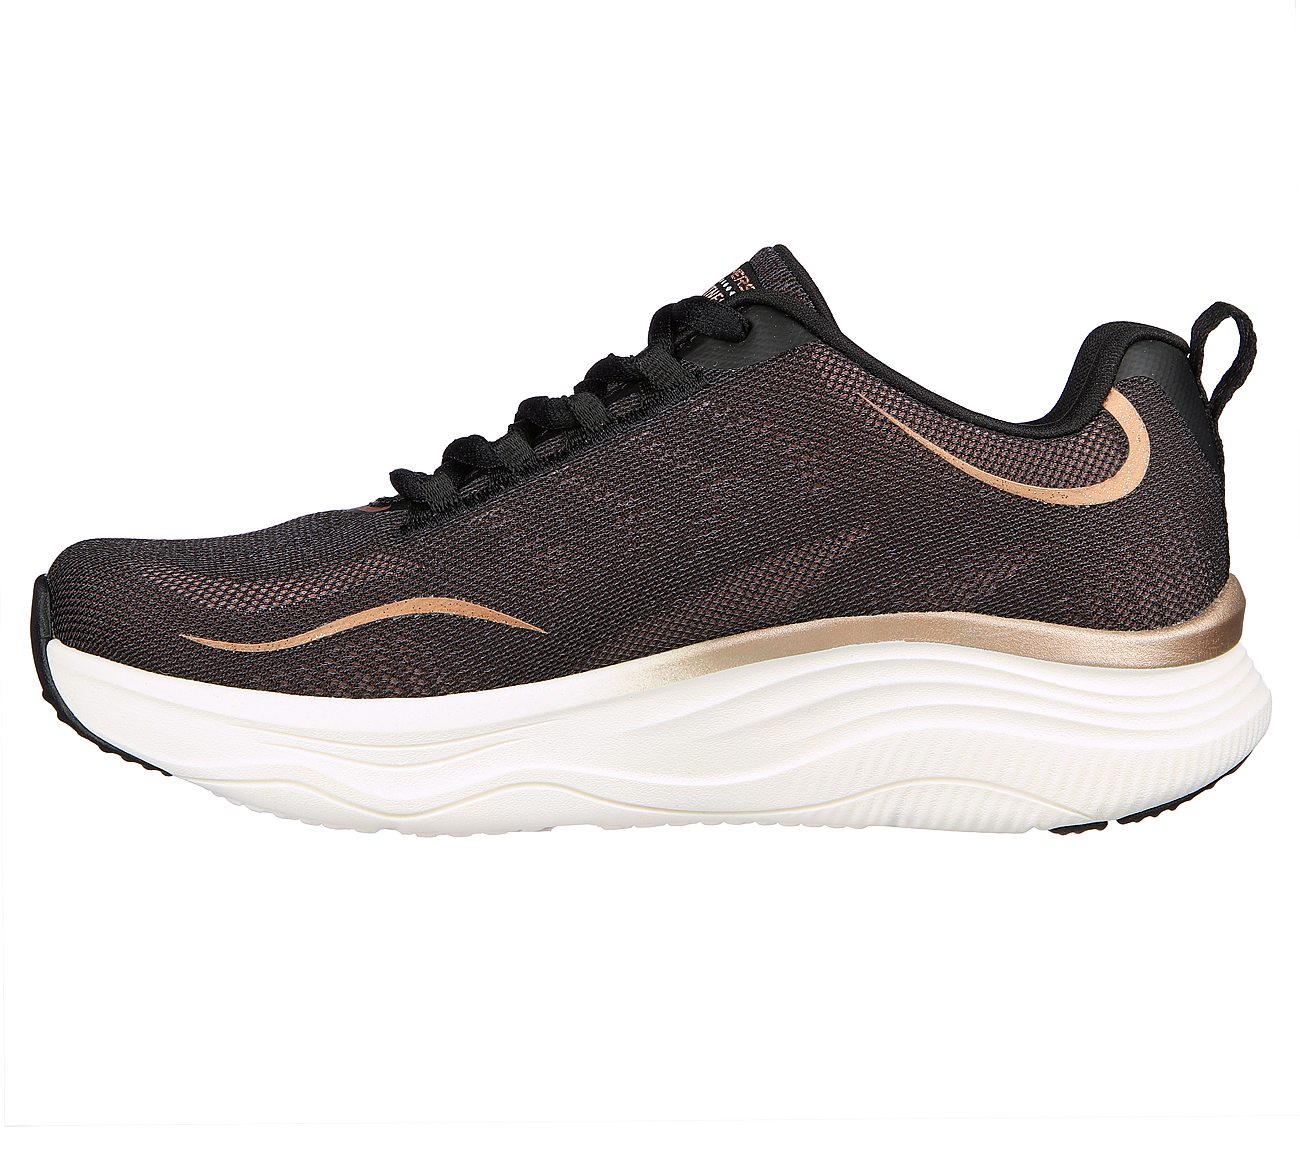 D'LUX FITNESS-PURE GLAM, BLACK/ROSE GOLD Footwear Left View